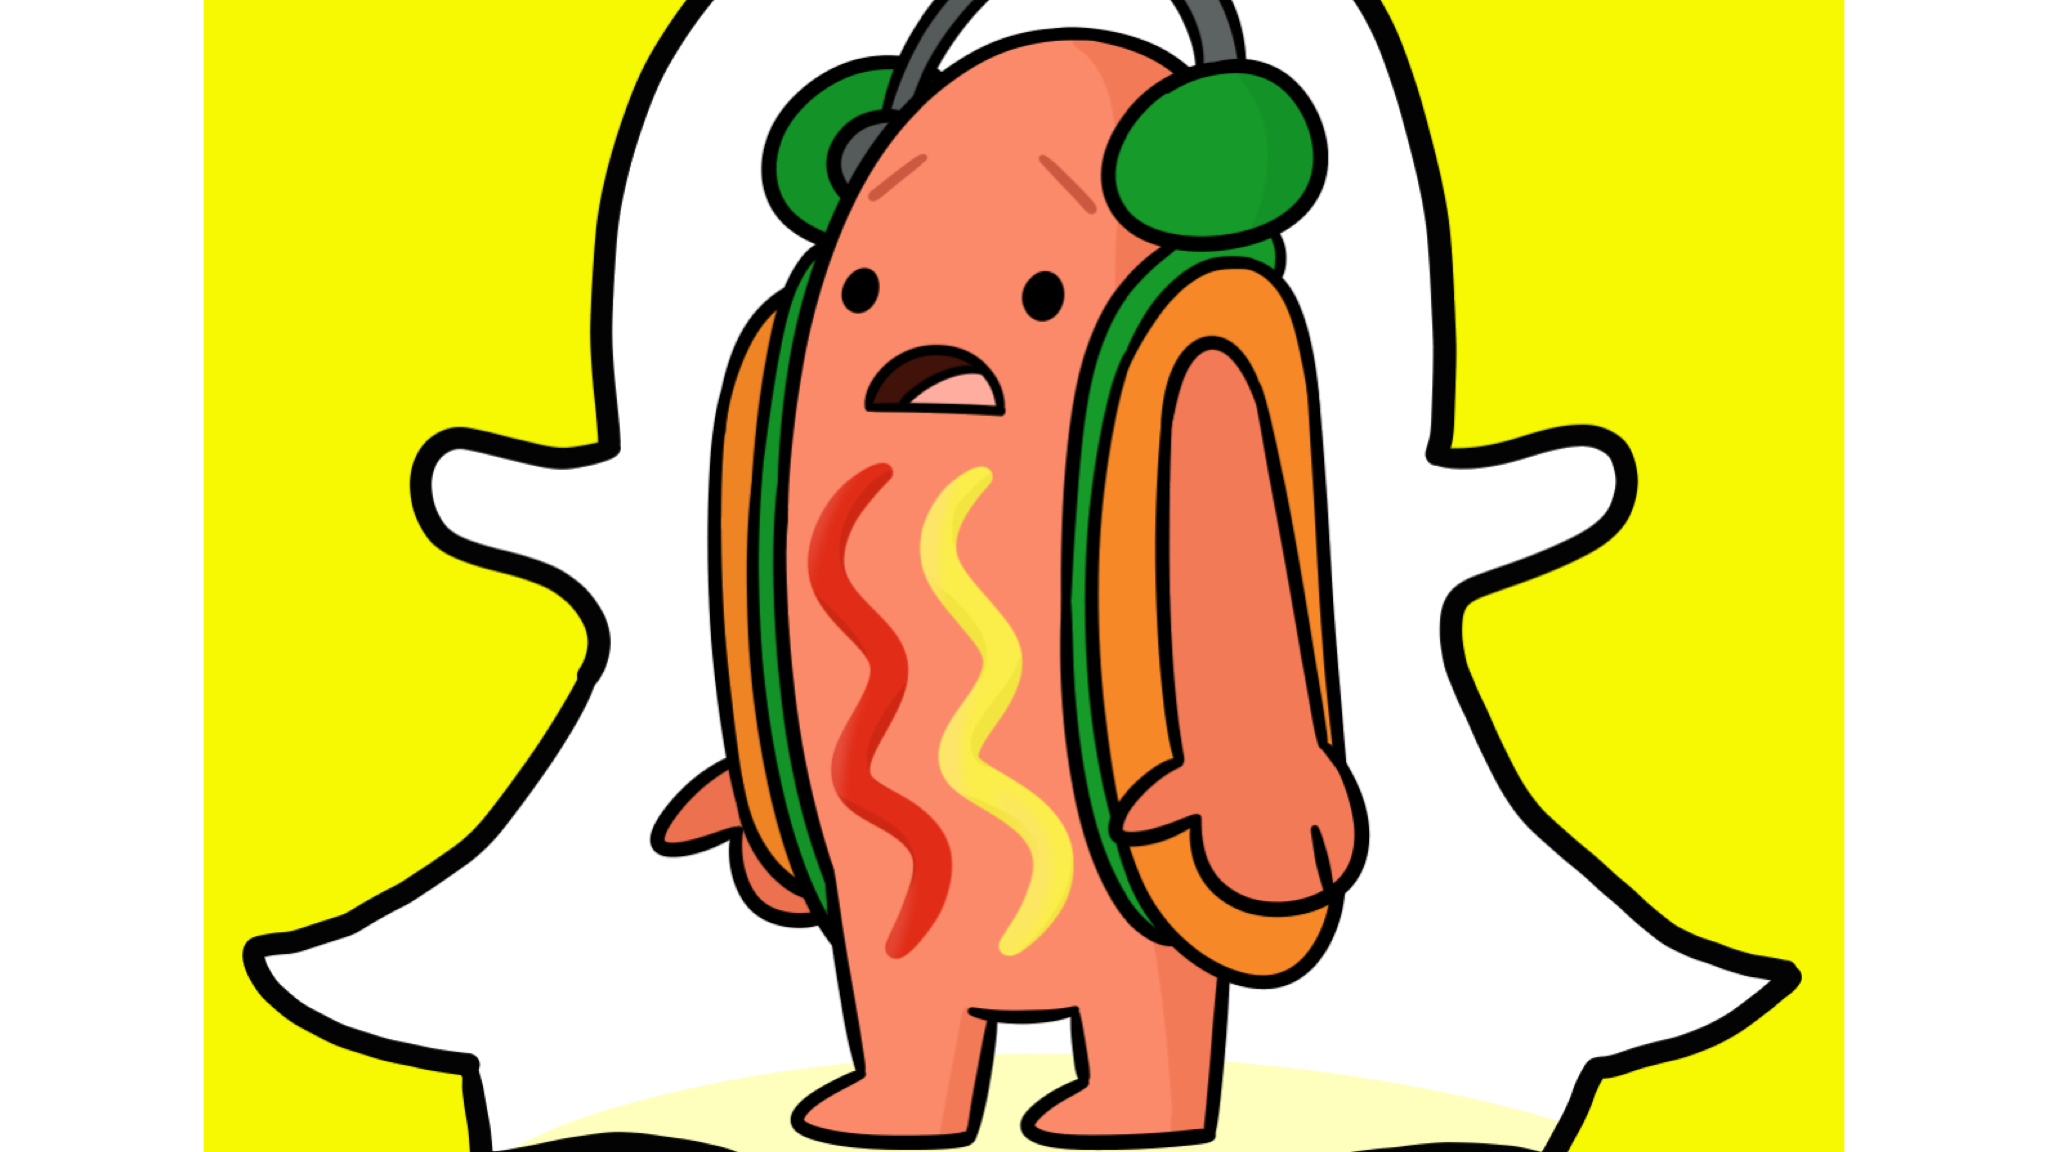 With A Hot Dog Snapchat Gave The World A Meme And Half The Native